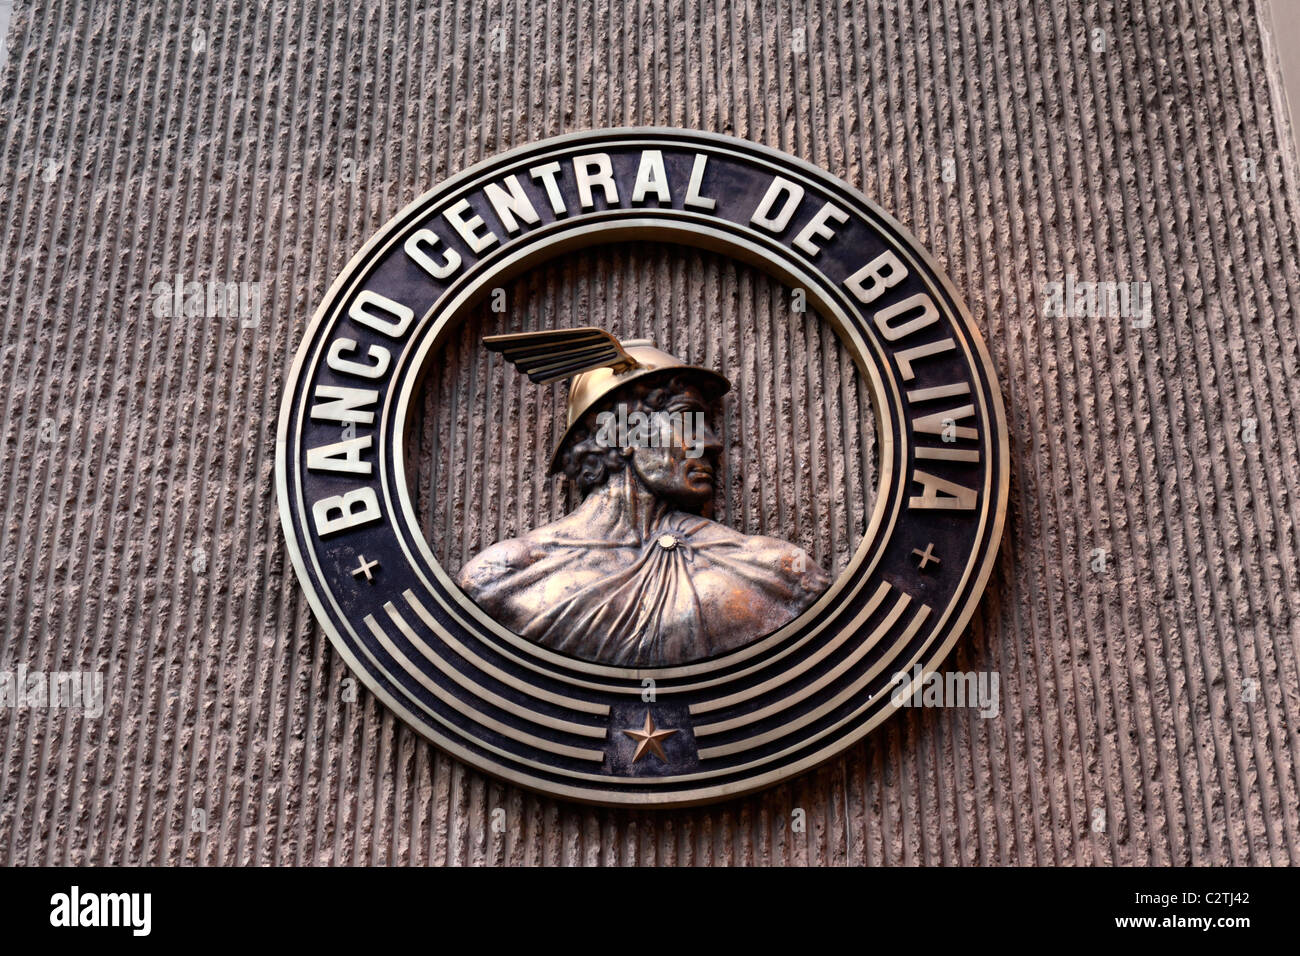 Logo of the Banco Central de Bolivia / Bolivian Central Bank on the wall of the bank headquarters building, La Paz, Bolivia Stock Photo